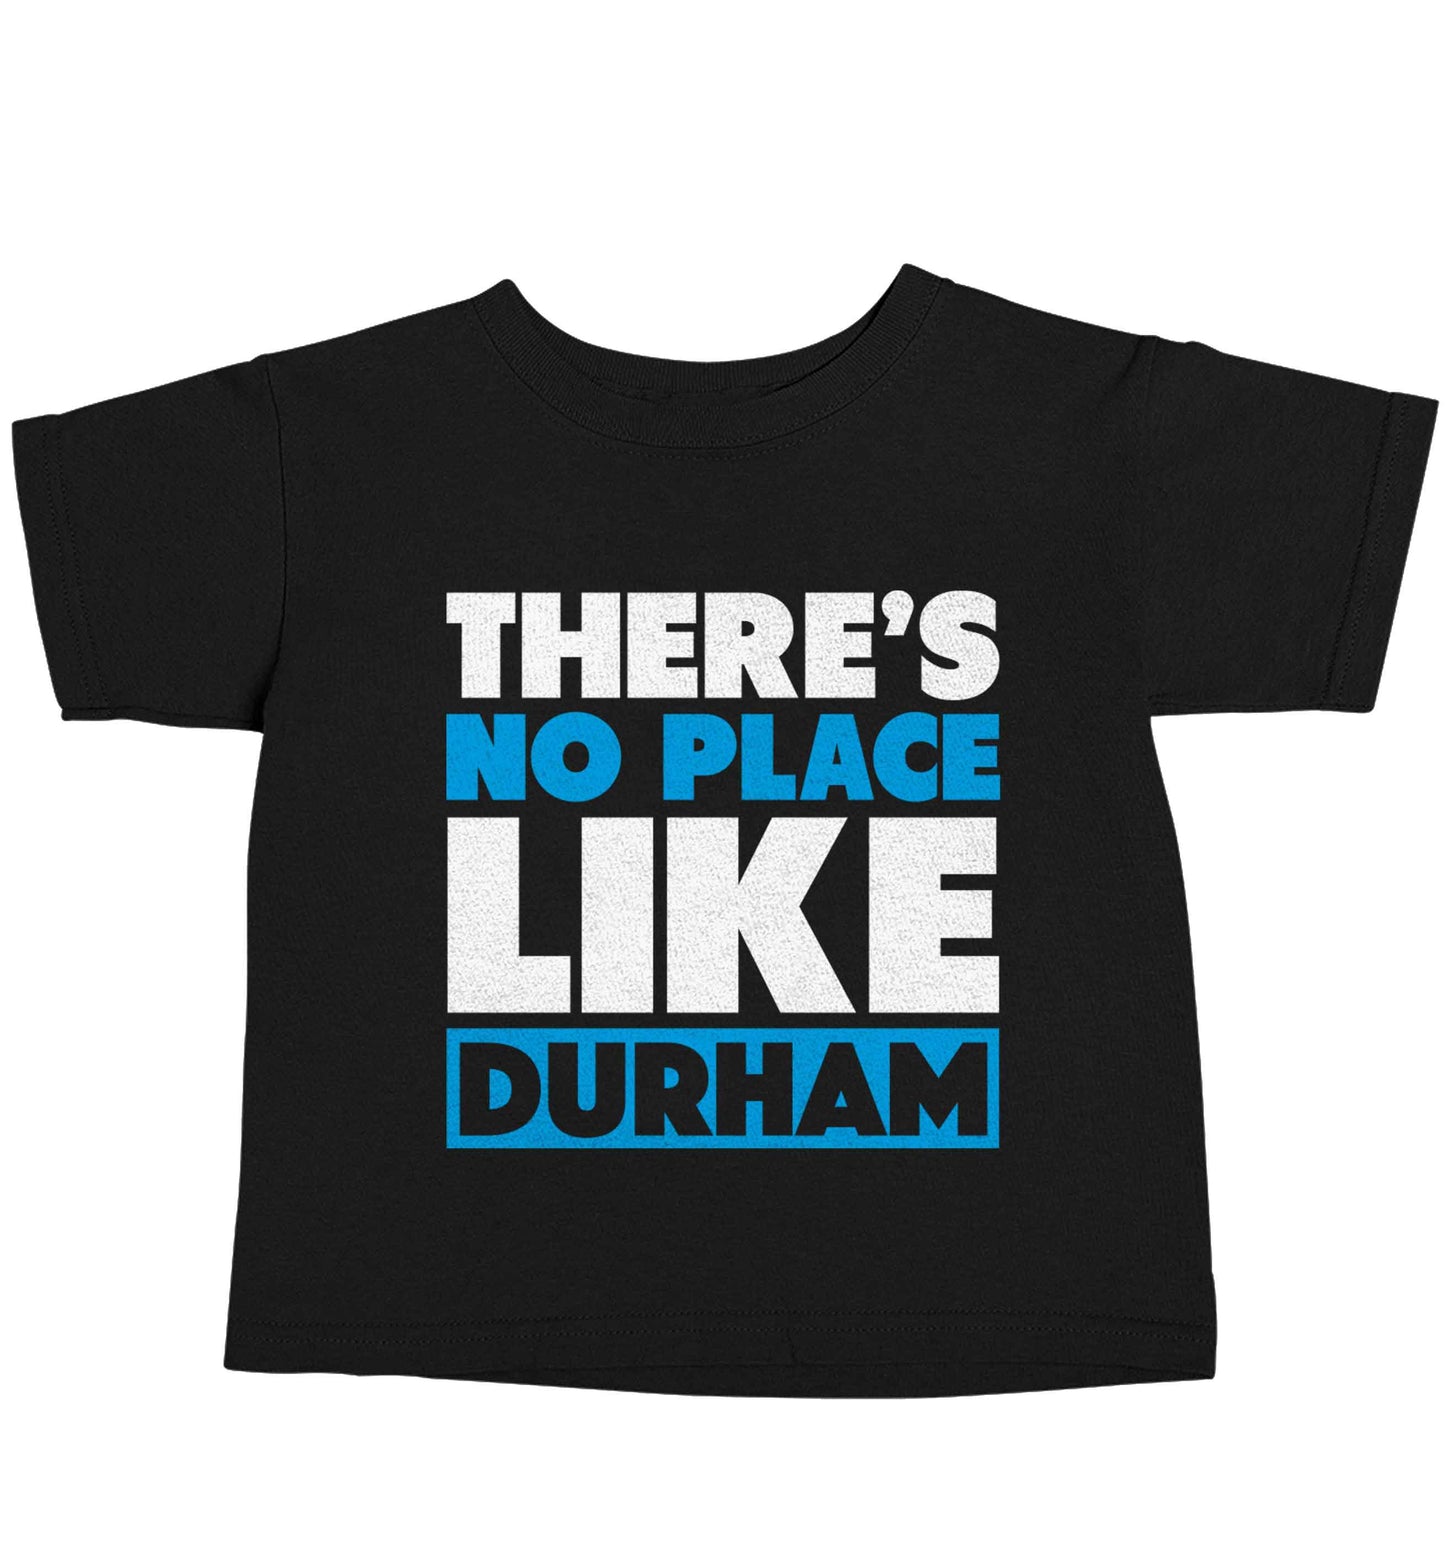 There's no place like Durham Black baby toddler Tshirt 2 years